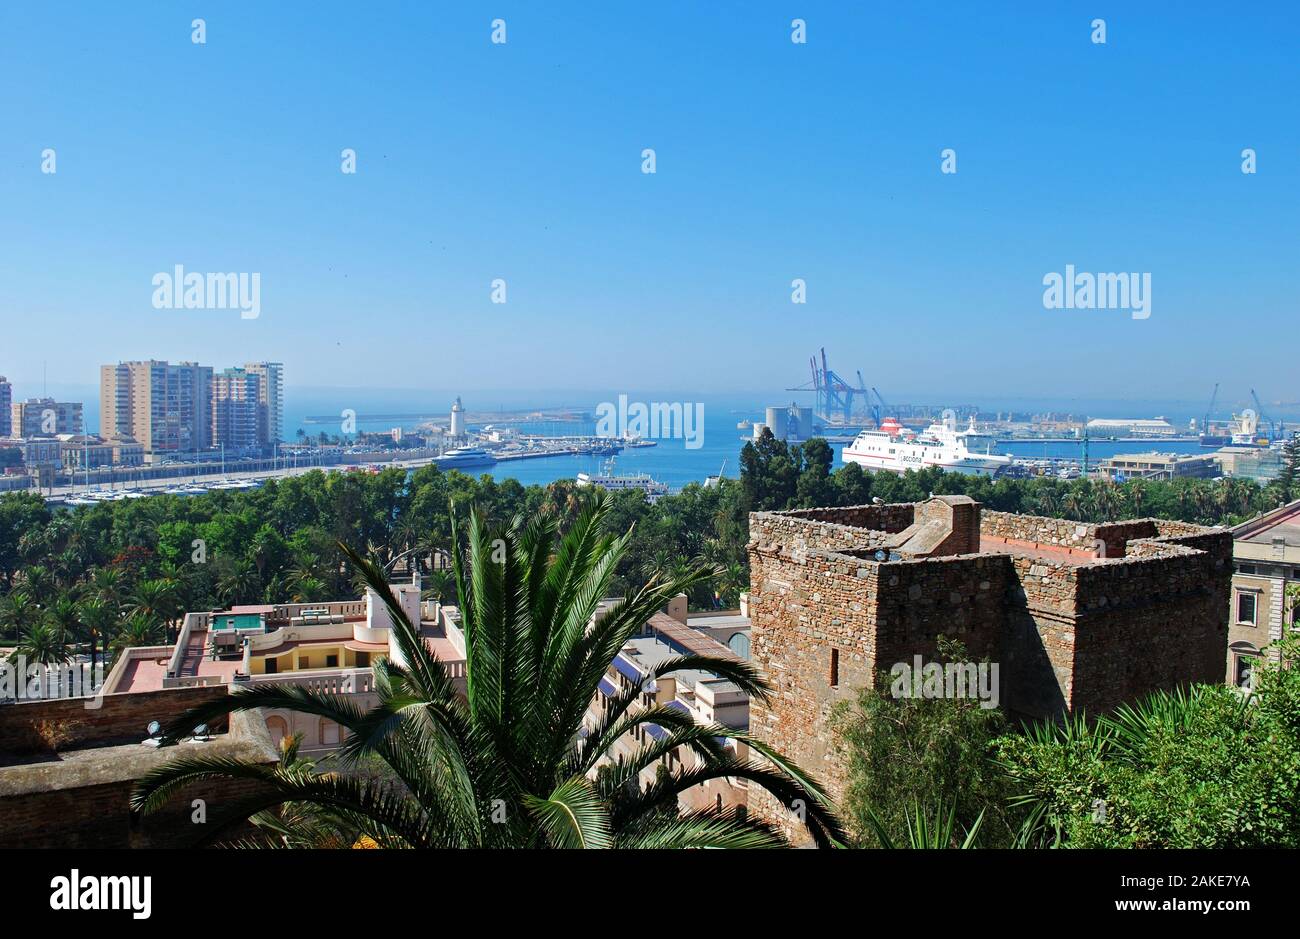 Elevated harbour view with the castle walls and Christs Gate in the foreground, Malaga, Malaga Province, Andalucia, Spain. Stock Photo